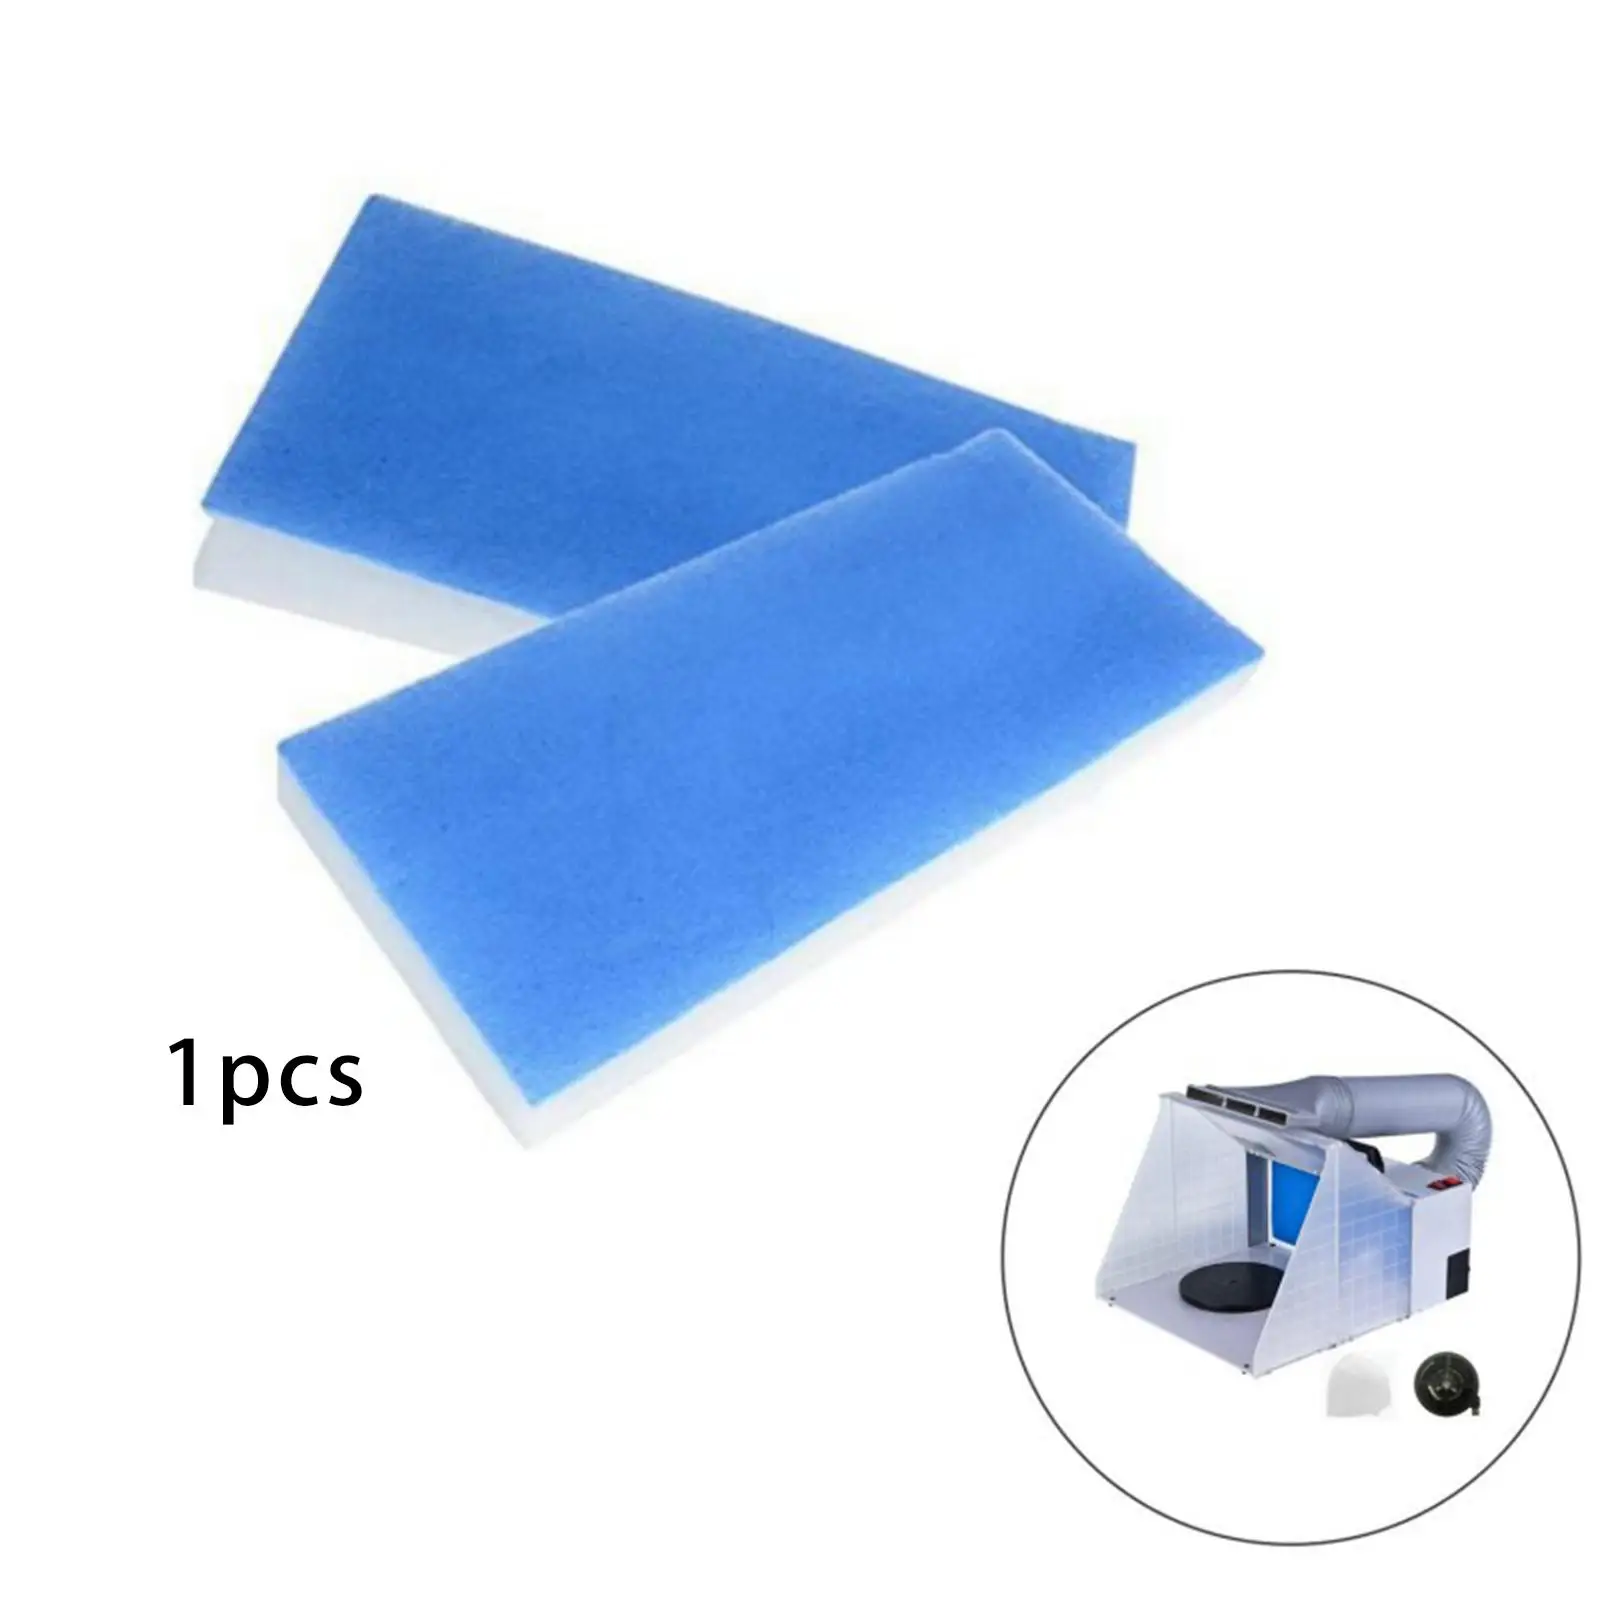 1Pcs Airbrush Spray Booth High Quality Material Filter Pad Fiberglass Replaceable for Sky Enterprise, Airhobby Master, Paasche